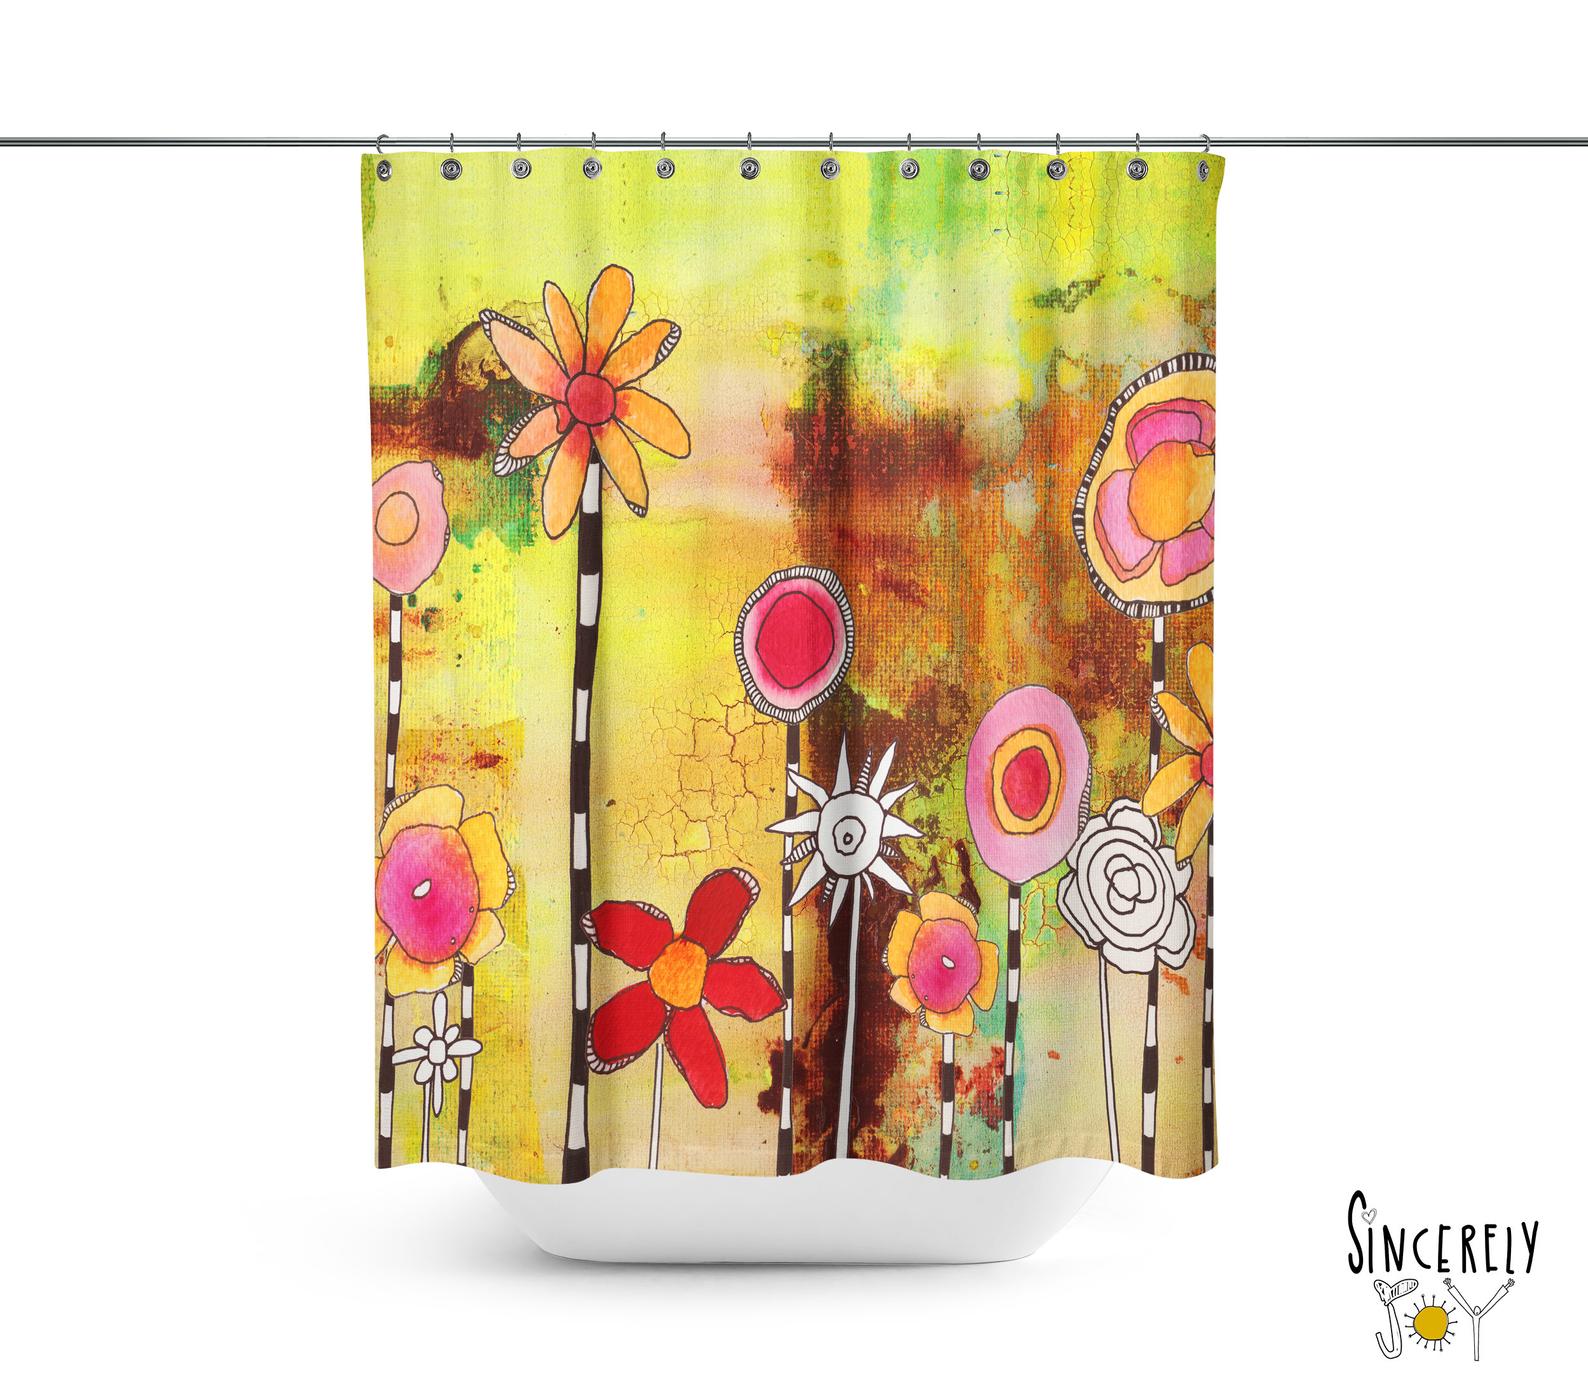 Abstract Mixed Media Shower Curtain 'Garden Party'